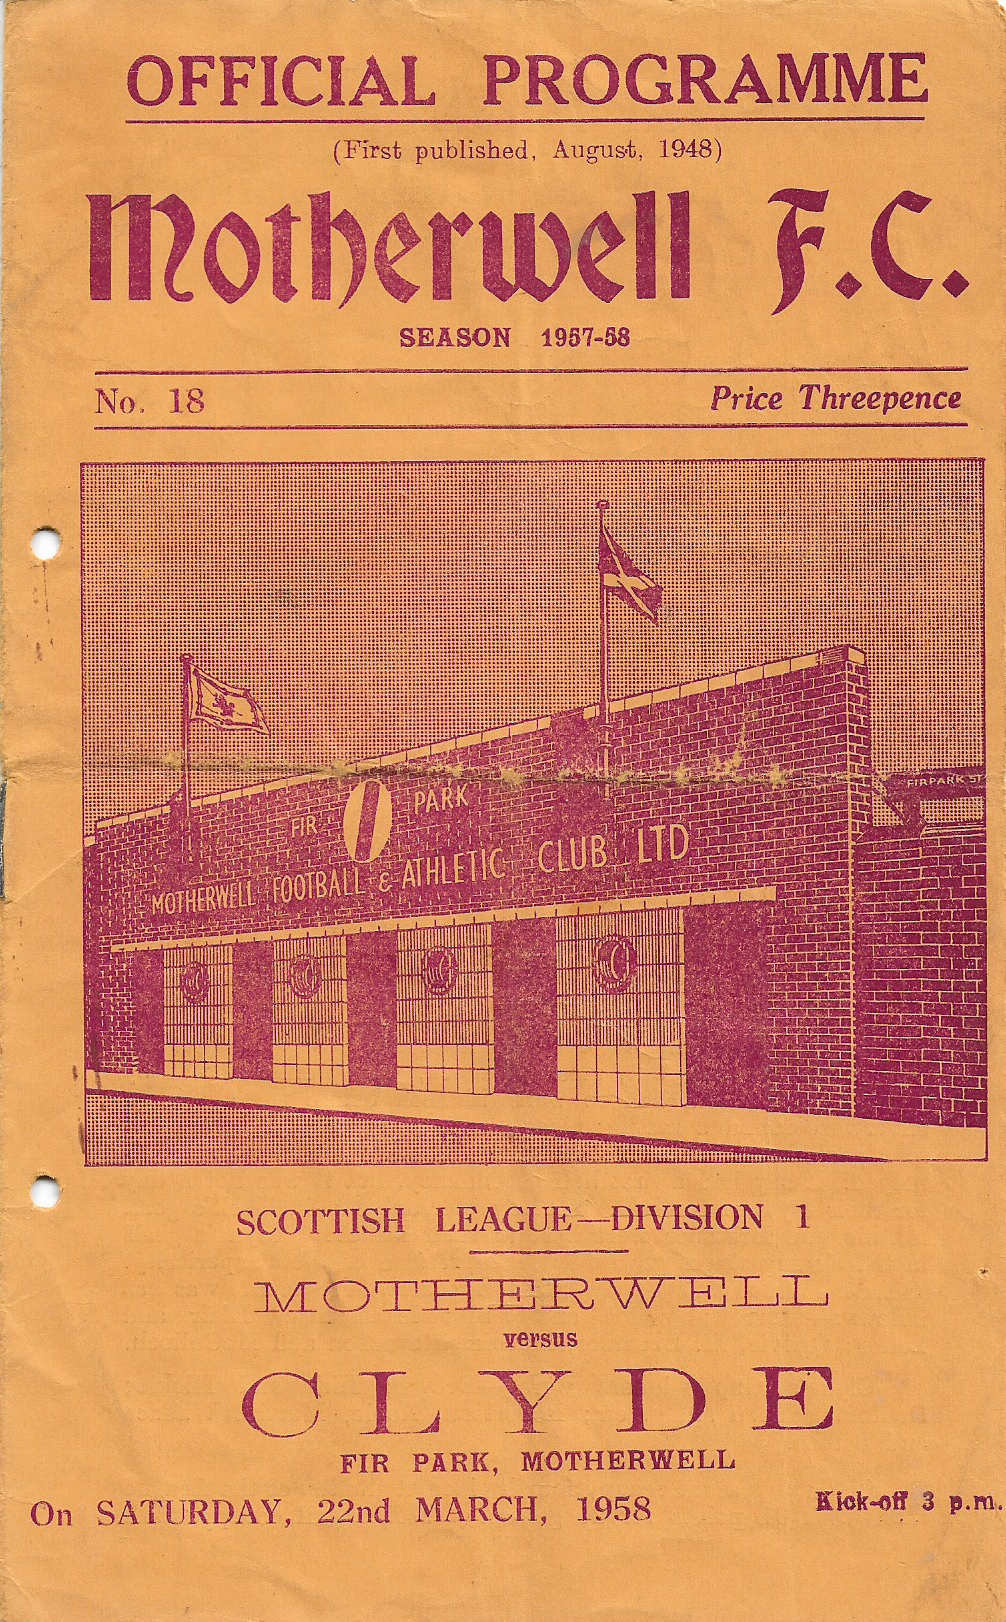 Motherwell vs Clyde Programme Cover